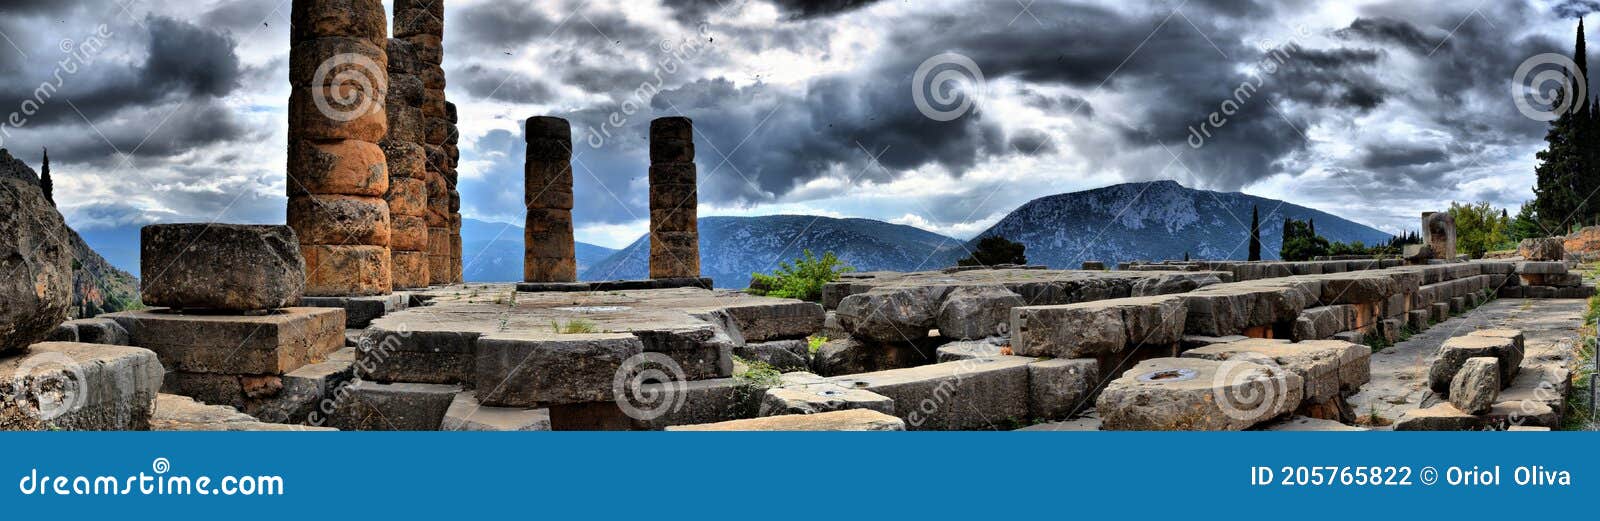 view of the main monuments and sites of greece. delphi. oracle of delphi.